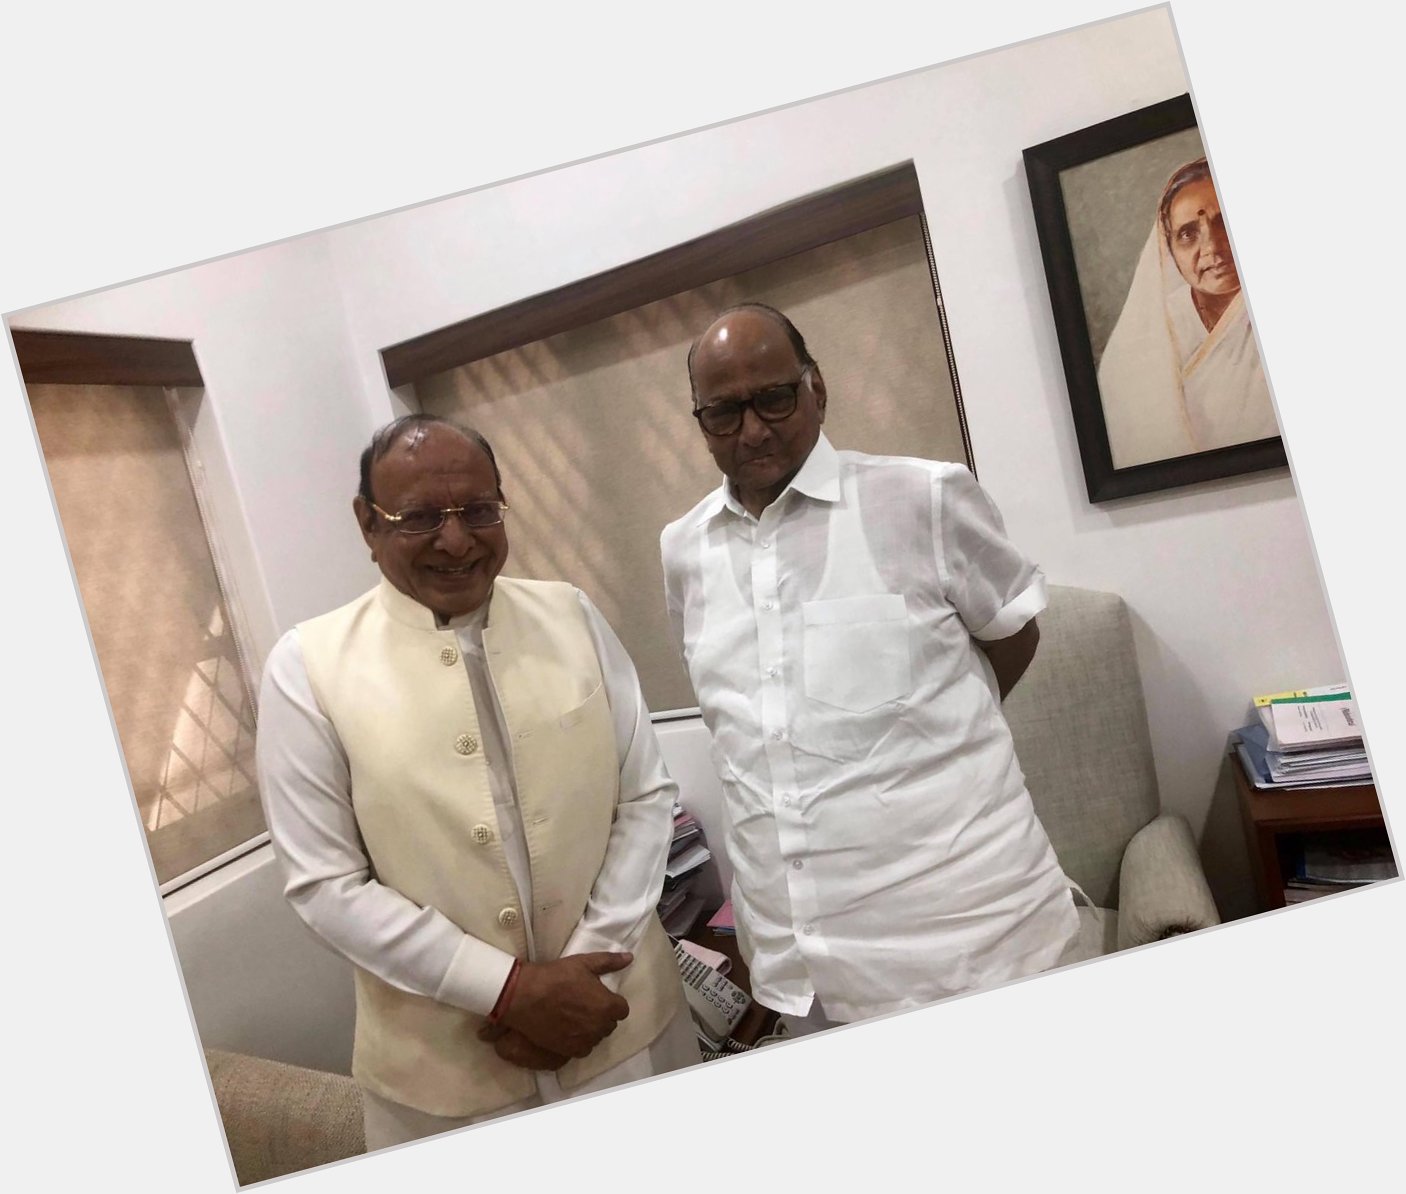 Happy birthday to Sri Sharad Pawar Ji. May God bless you with good health and with more power to lead the nation. 